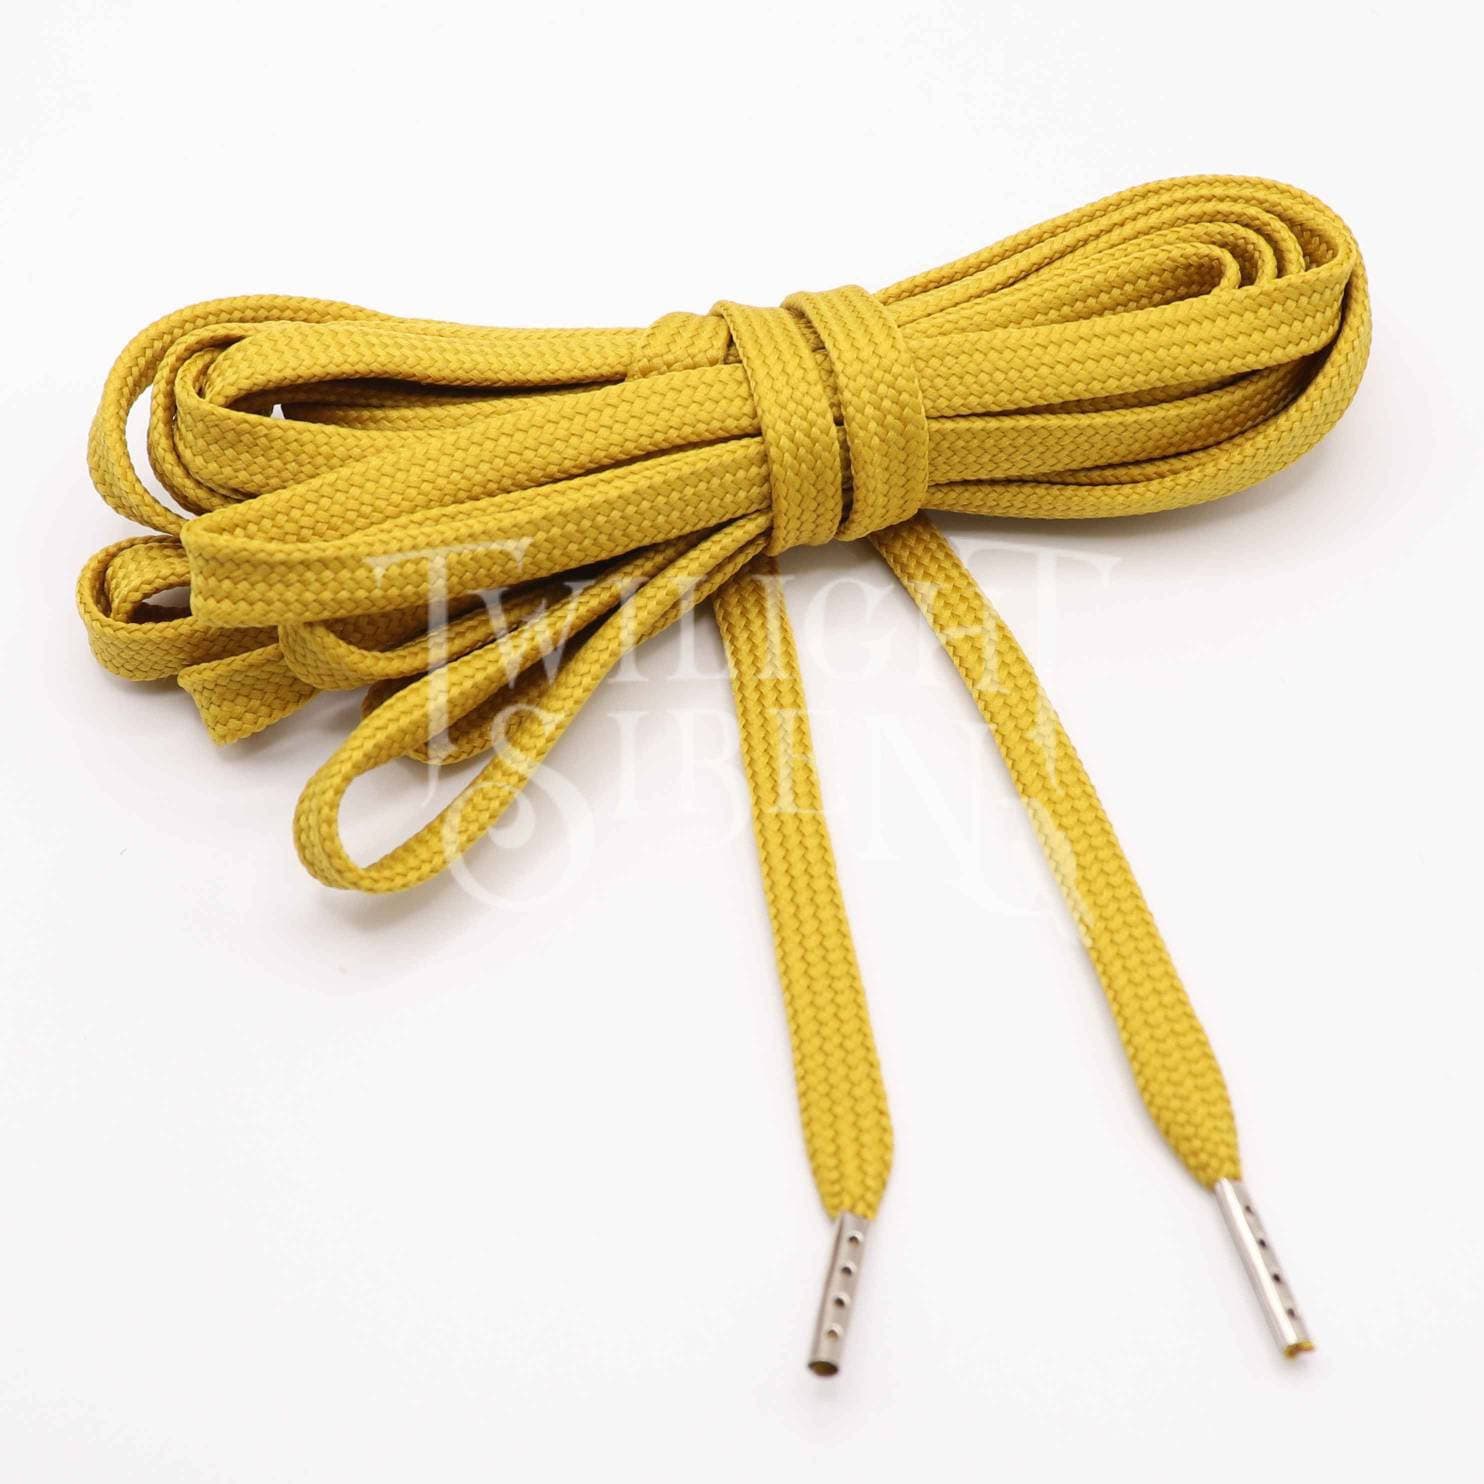 22mm Shoe Lace End Tips Metal Cord Ends Caps Leather Bullets Tube Clasps  Ribbon Stopper Aglets for Shoelace Replacement Hoodie Clothing 12pcs